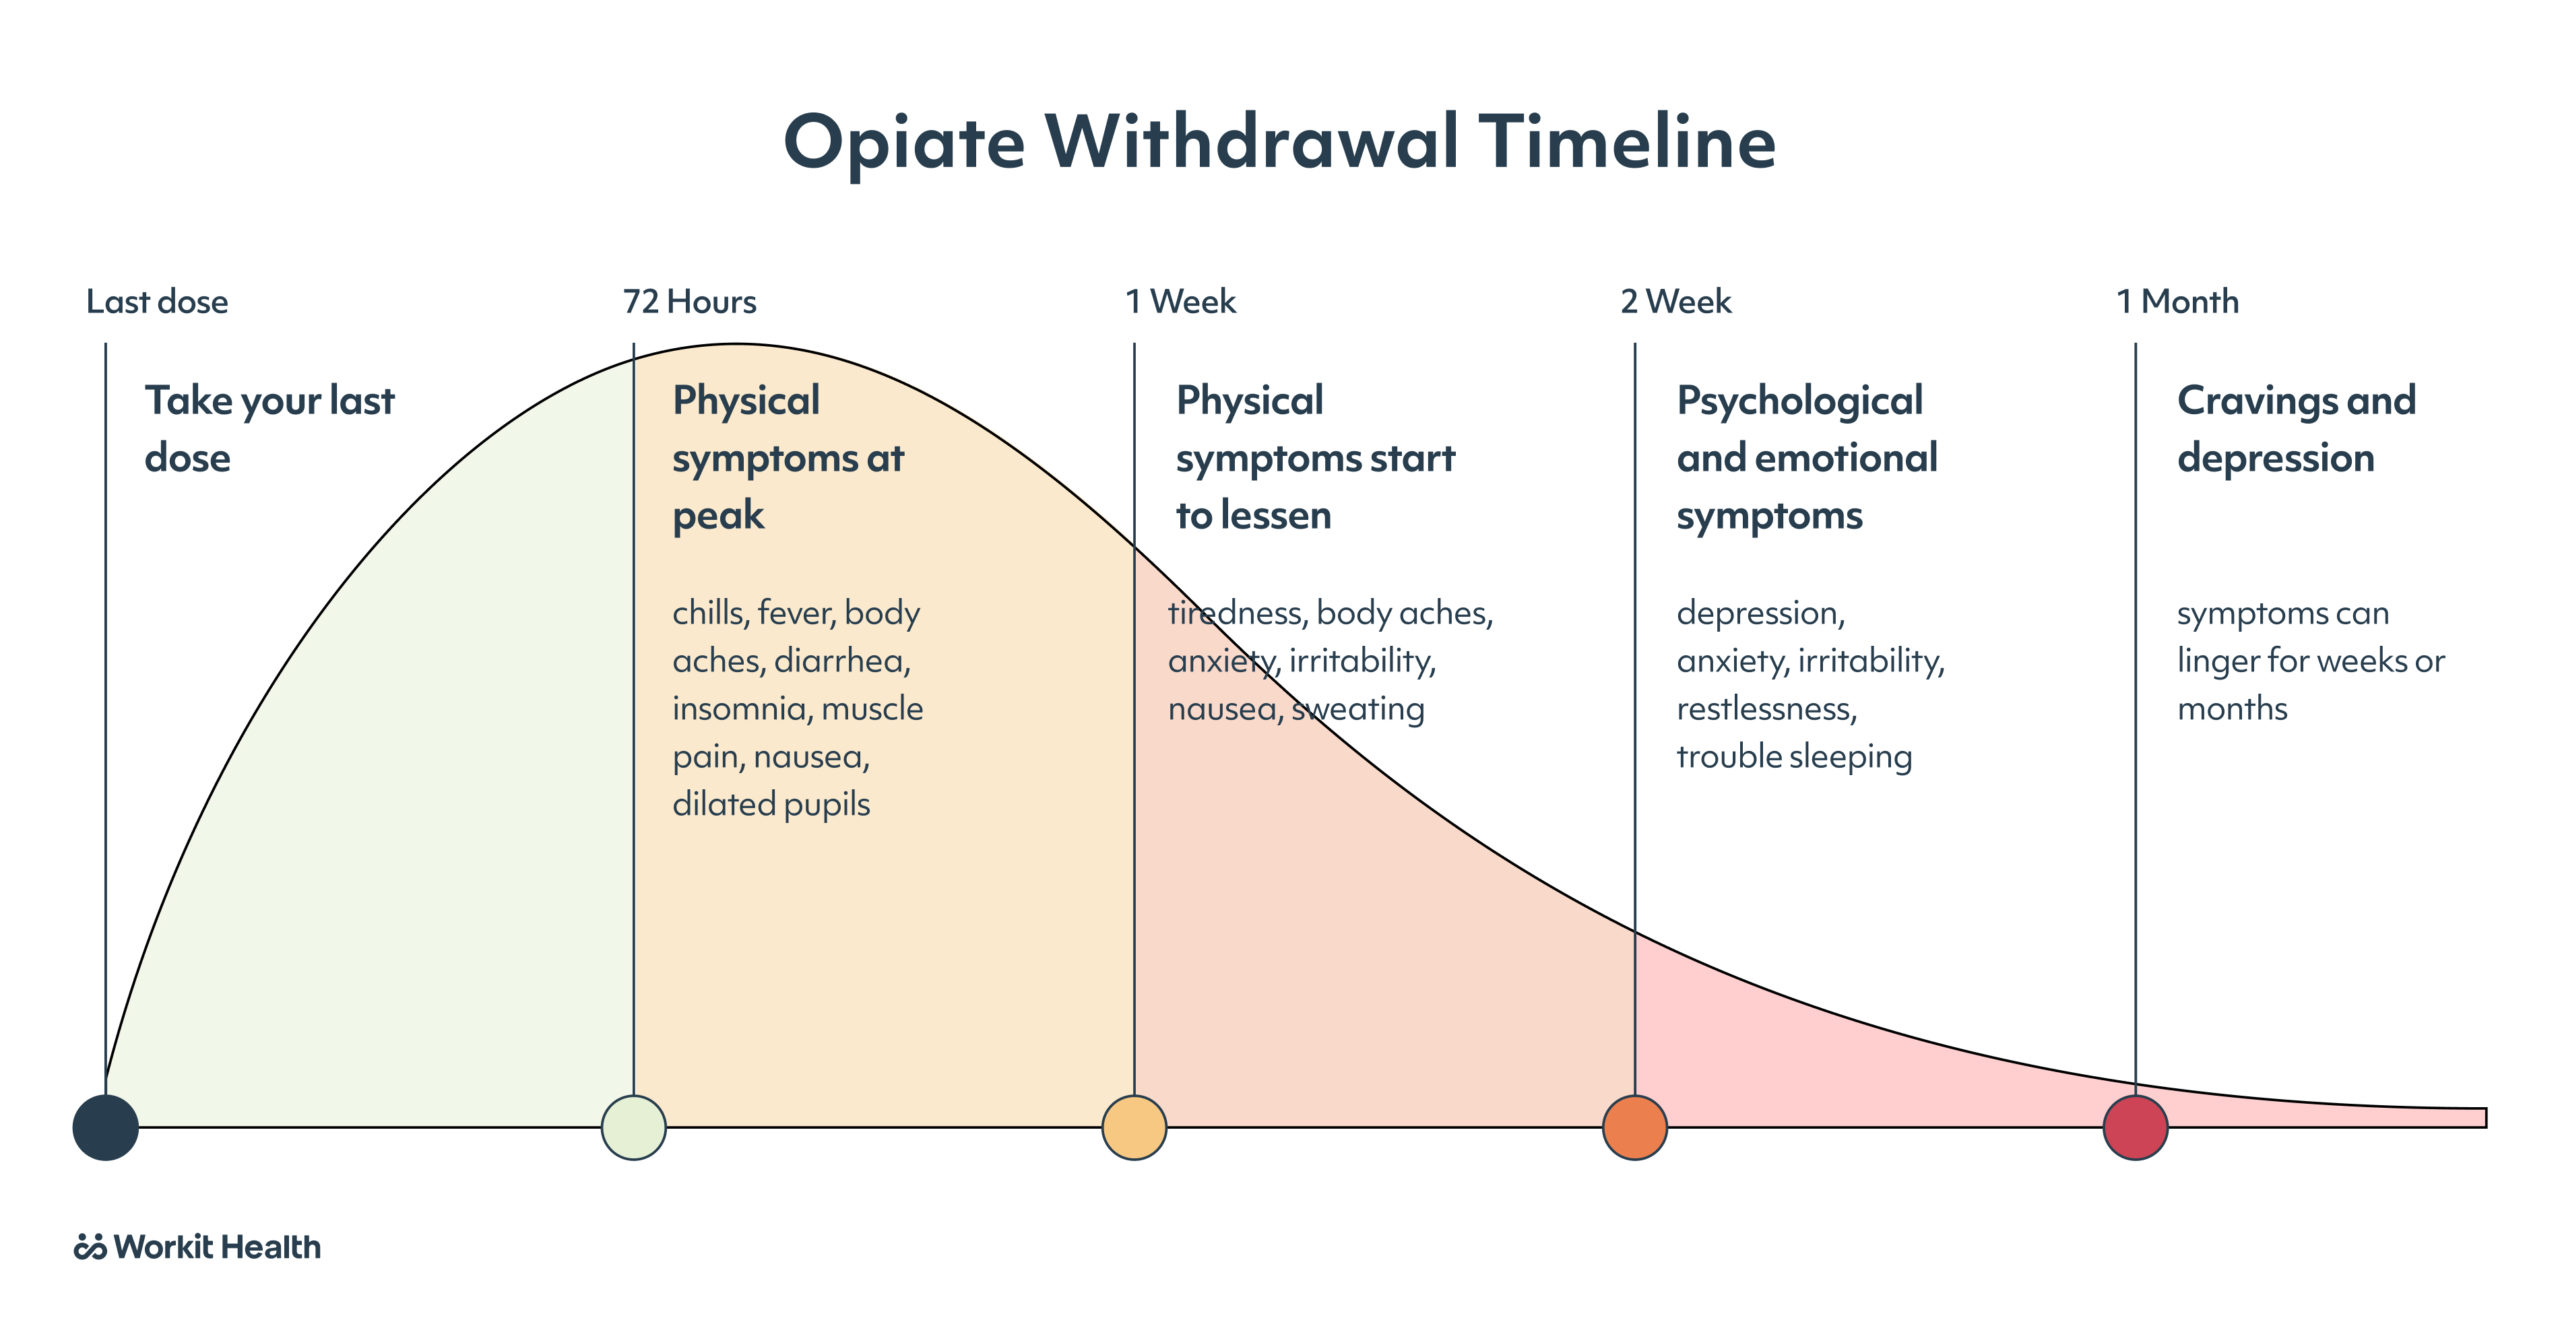 A bell curve showing the progression of symtpoms as someone goes through opioid withdarwal. Opiate withdrawal timeline